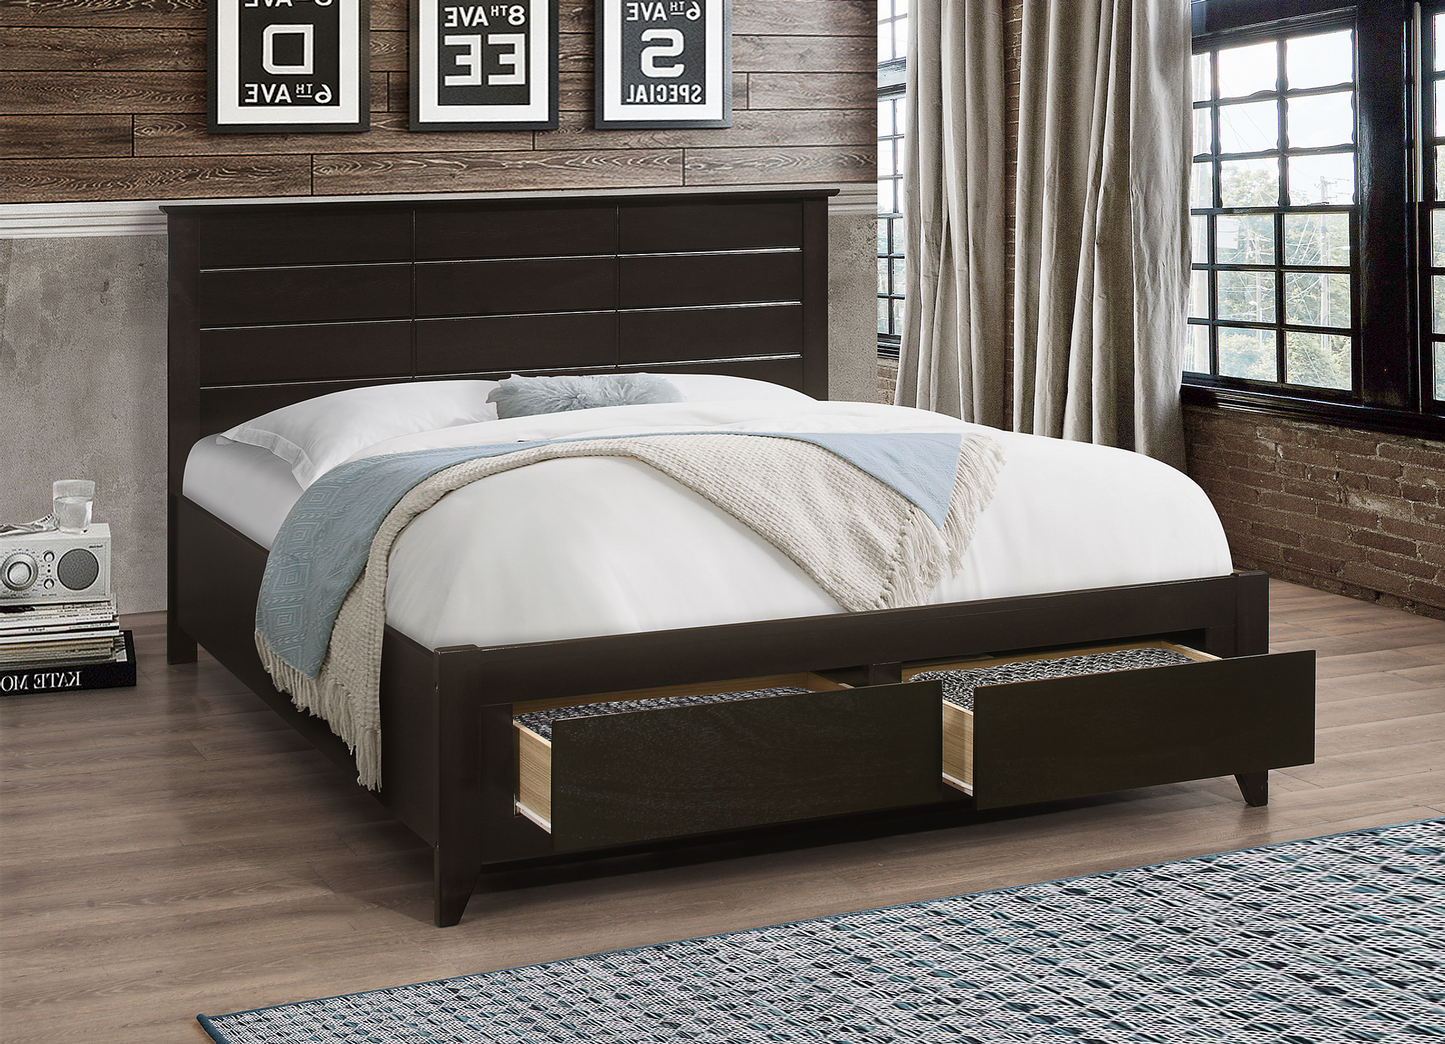 DOUBLE (FULL) SIZE- (421 ESPRESSO)- WOOD- BED FRAME- WITH DRAWERS